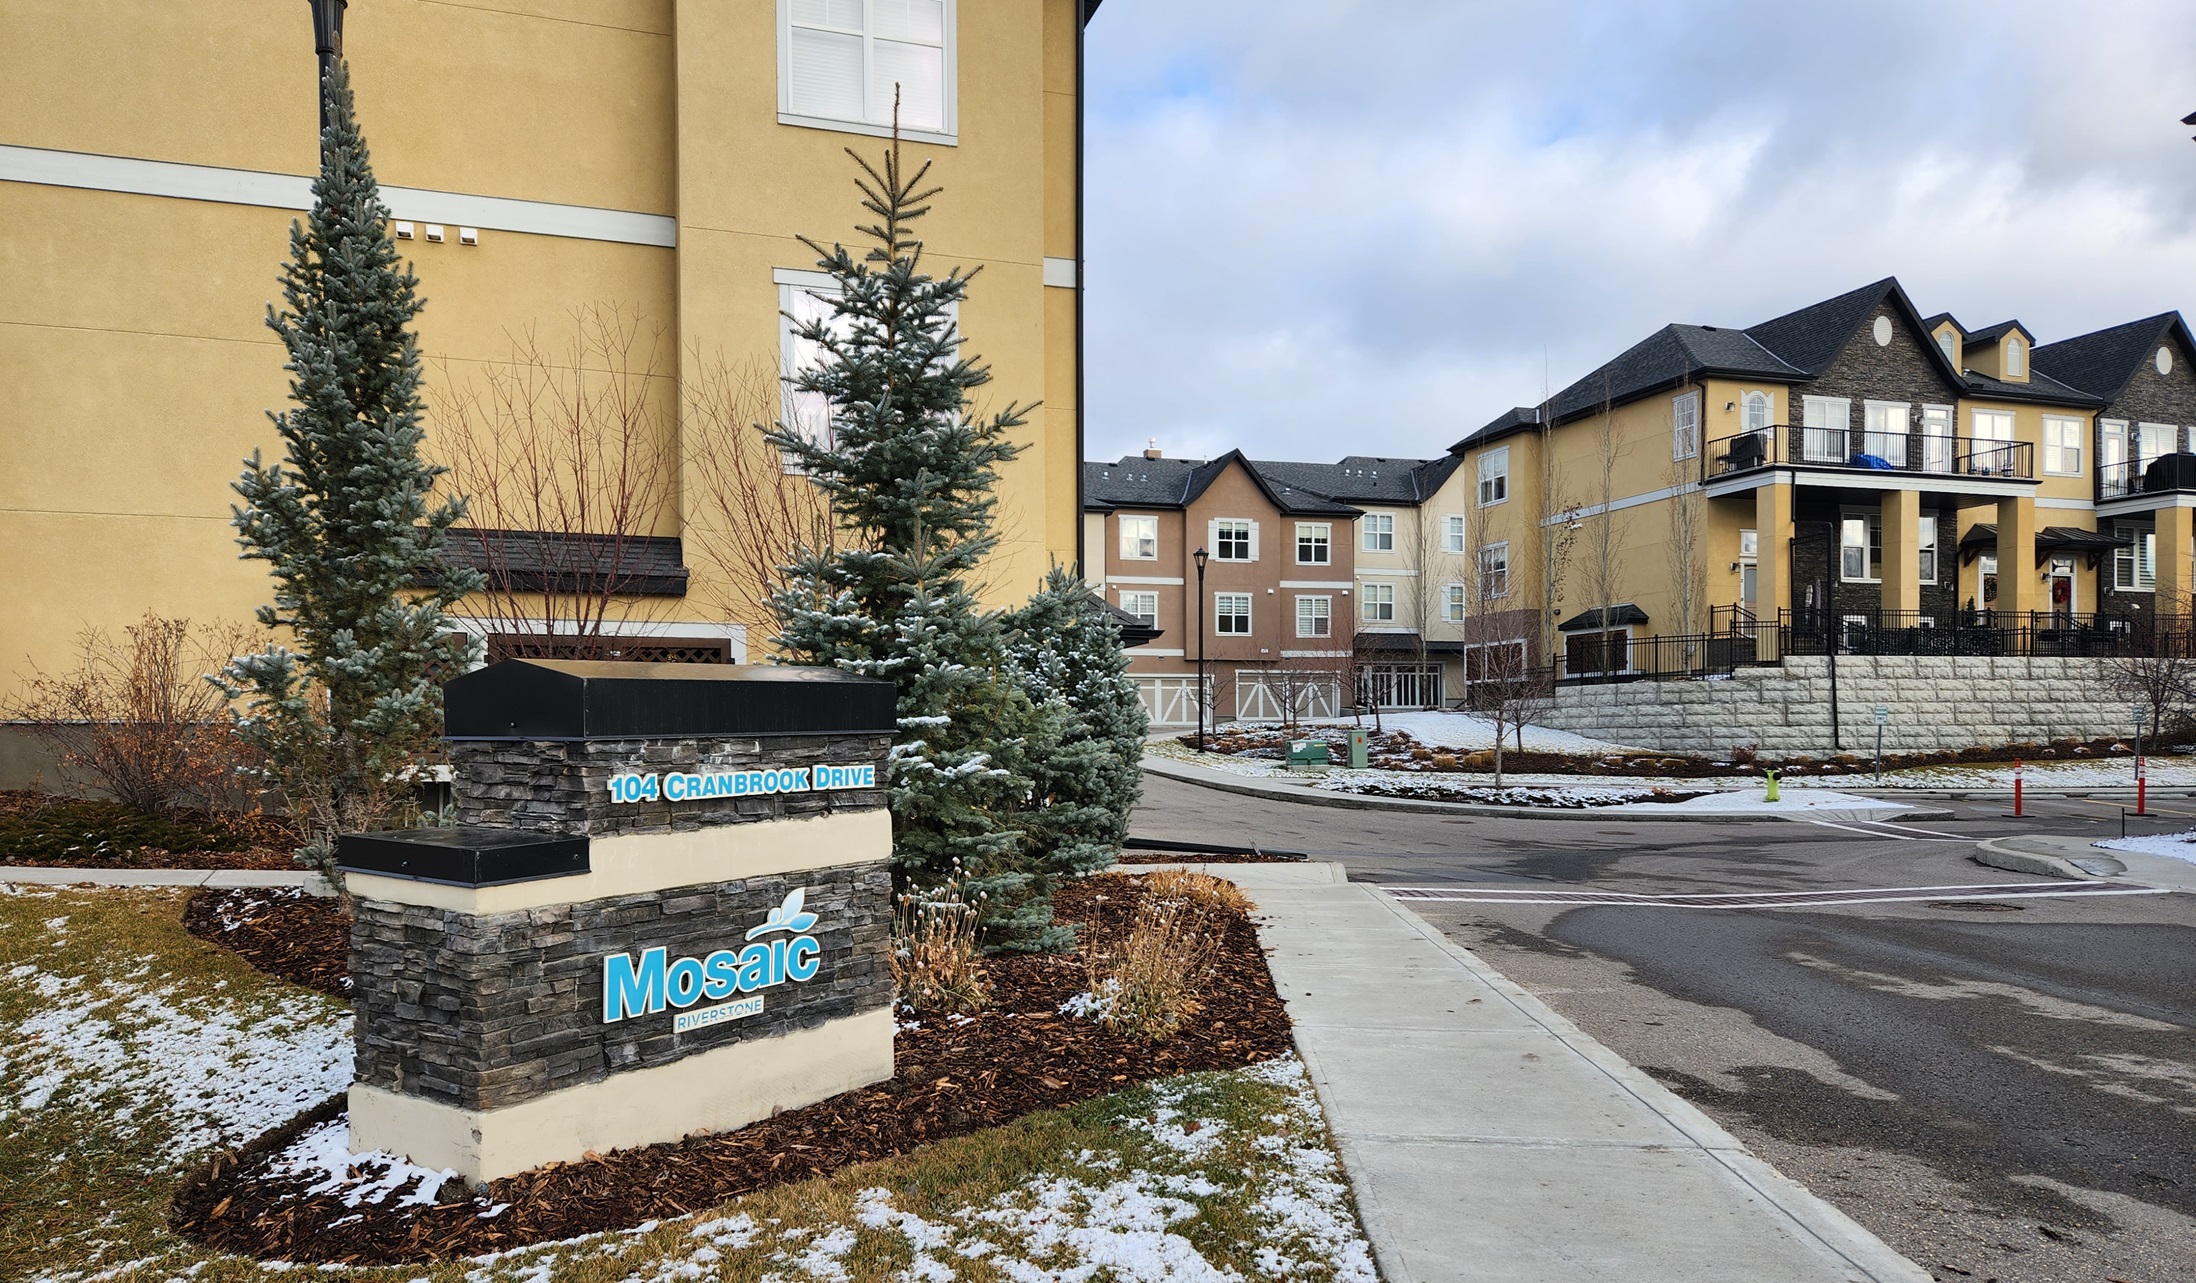 Entrance to condo complex, two to three storey townhomes, sign at entrance reads, Mosaic Riverstone 104 Cranbrook Drive